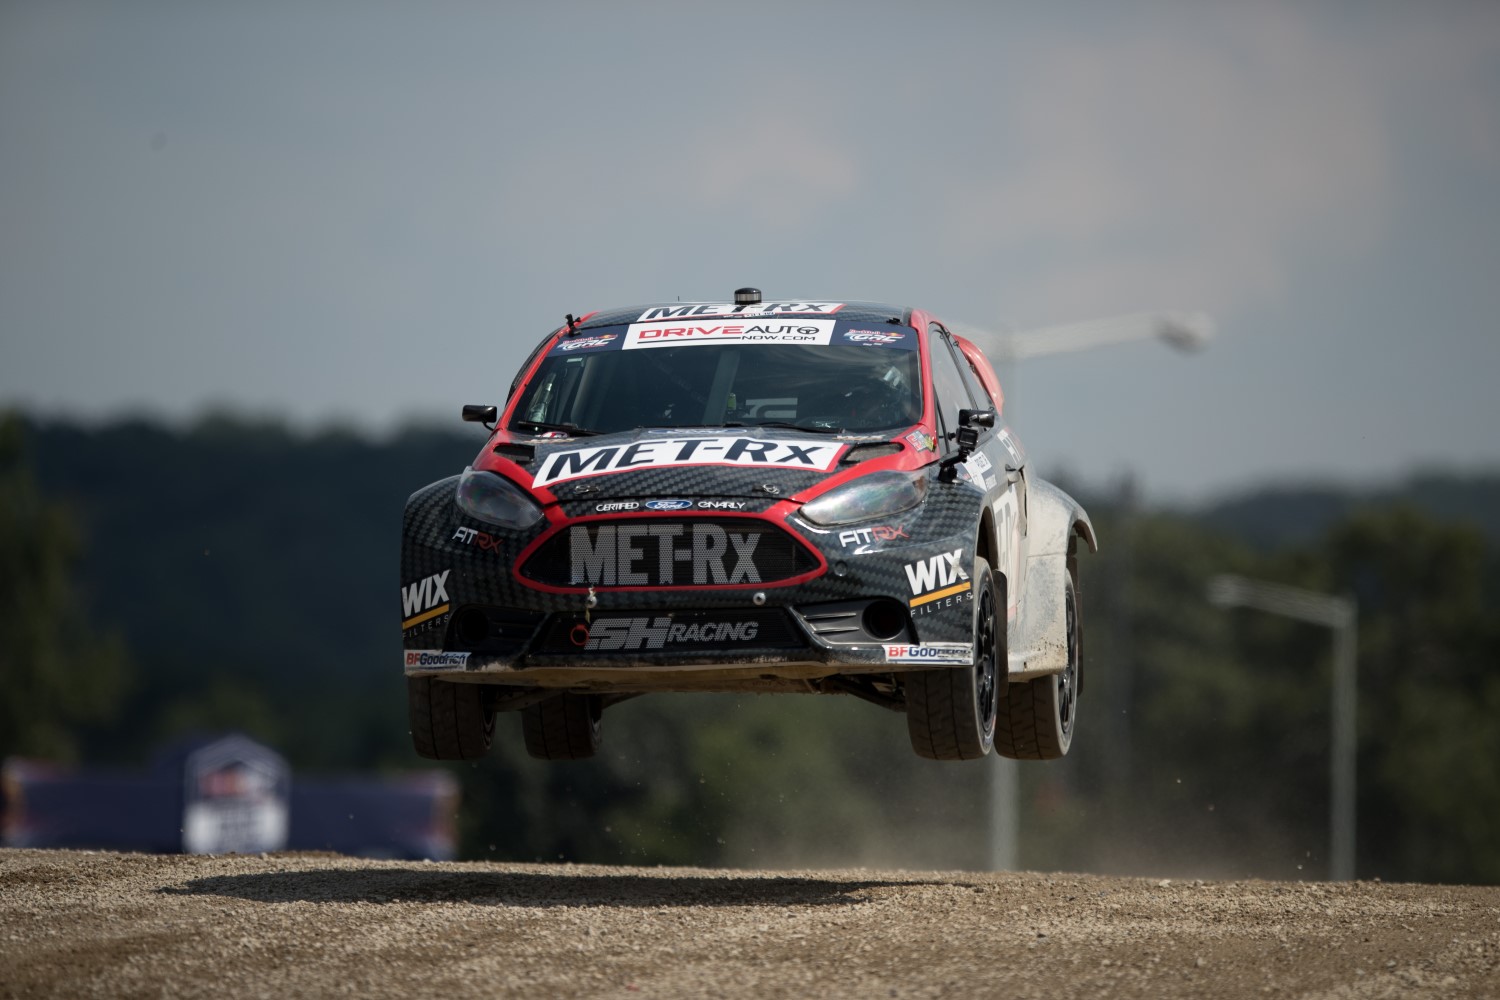 Red Bull Global Rallycross will be back in action April 29th. 